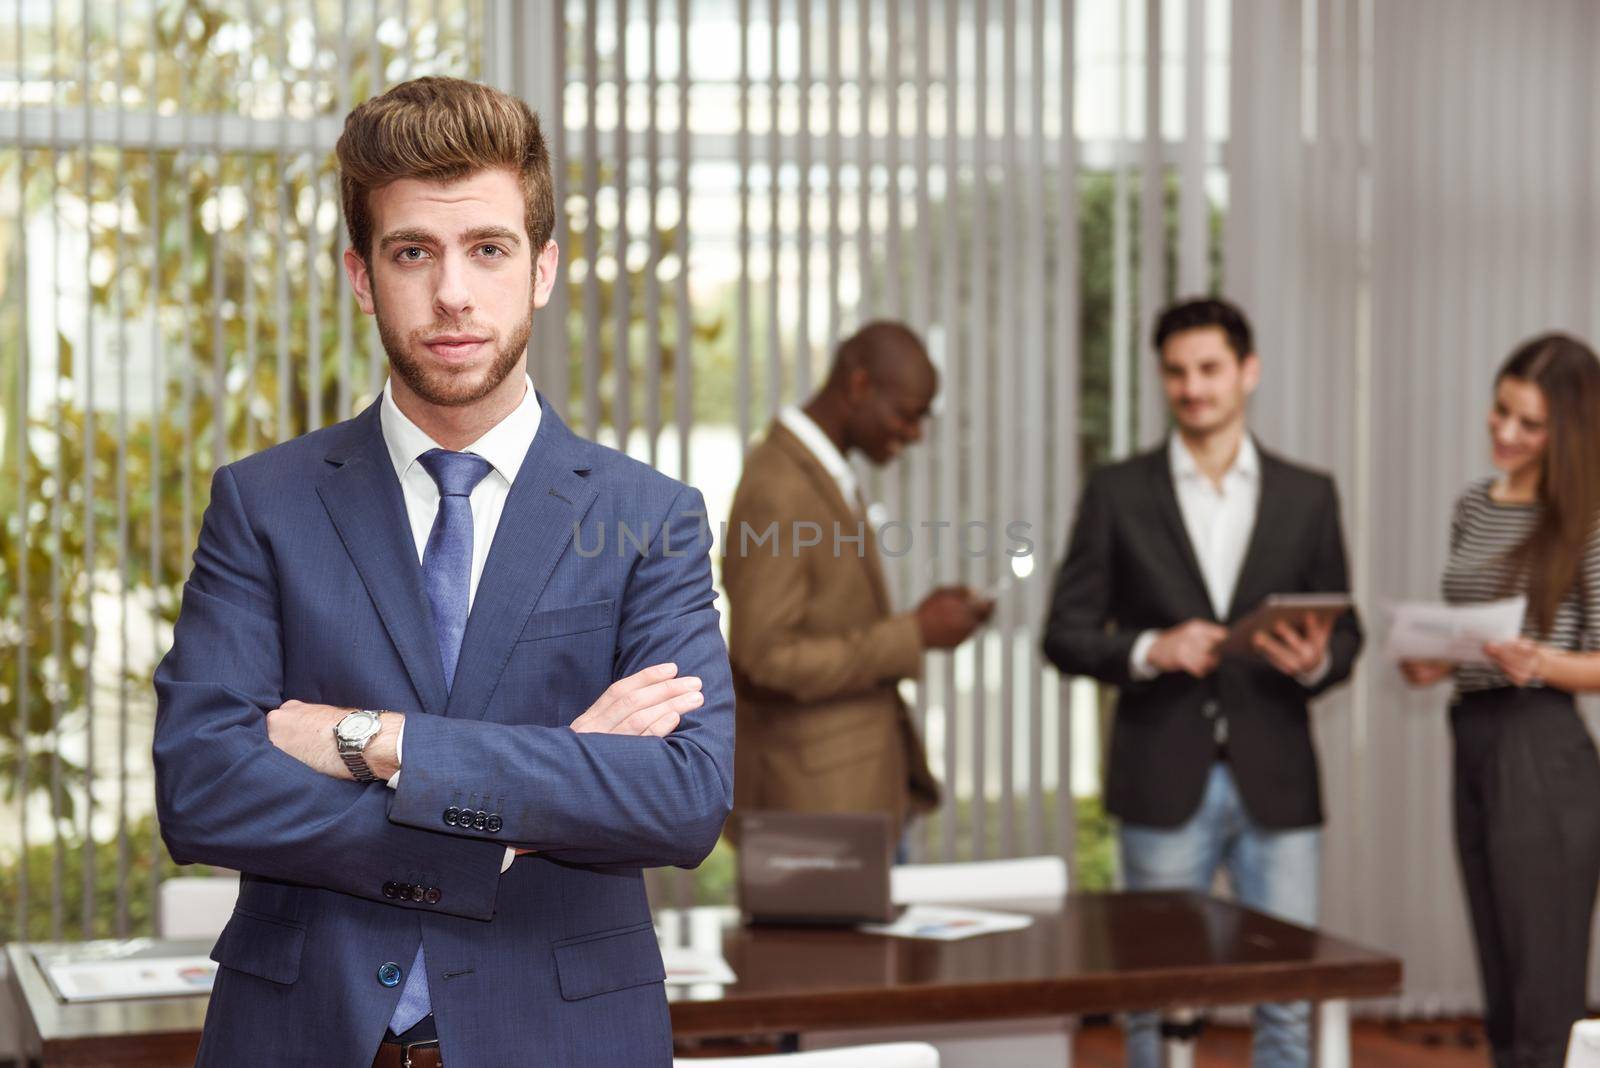 Businessman leader looking at camera with arms crossed in working environment. Group of people in the background